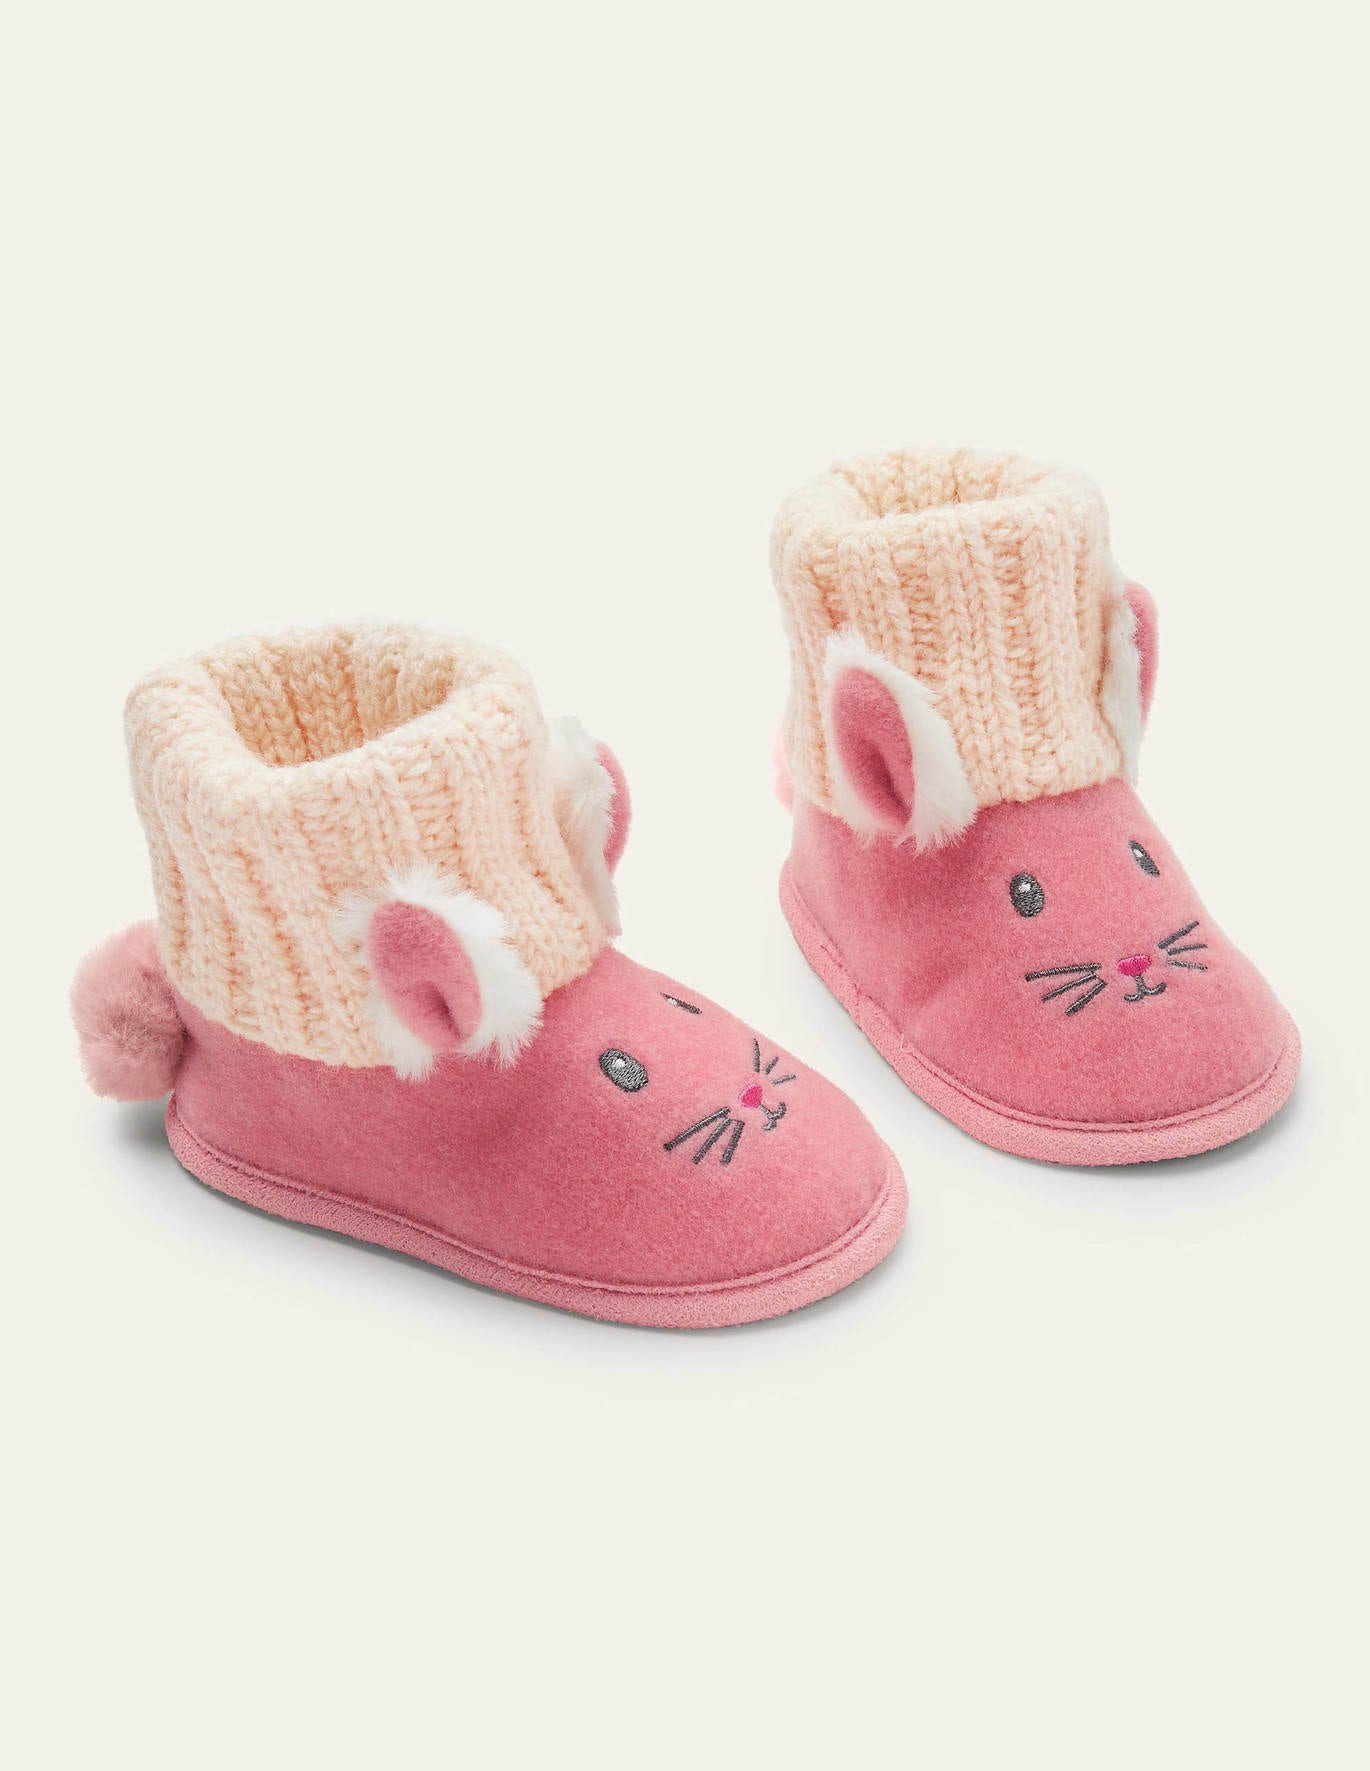 Boden Bunny Knitted Slipper Booties - Boto Pink